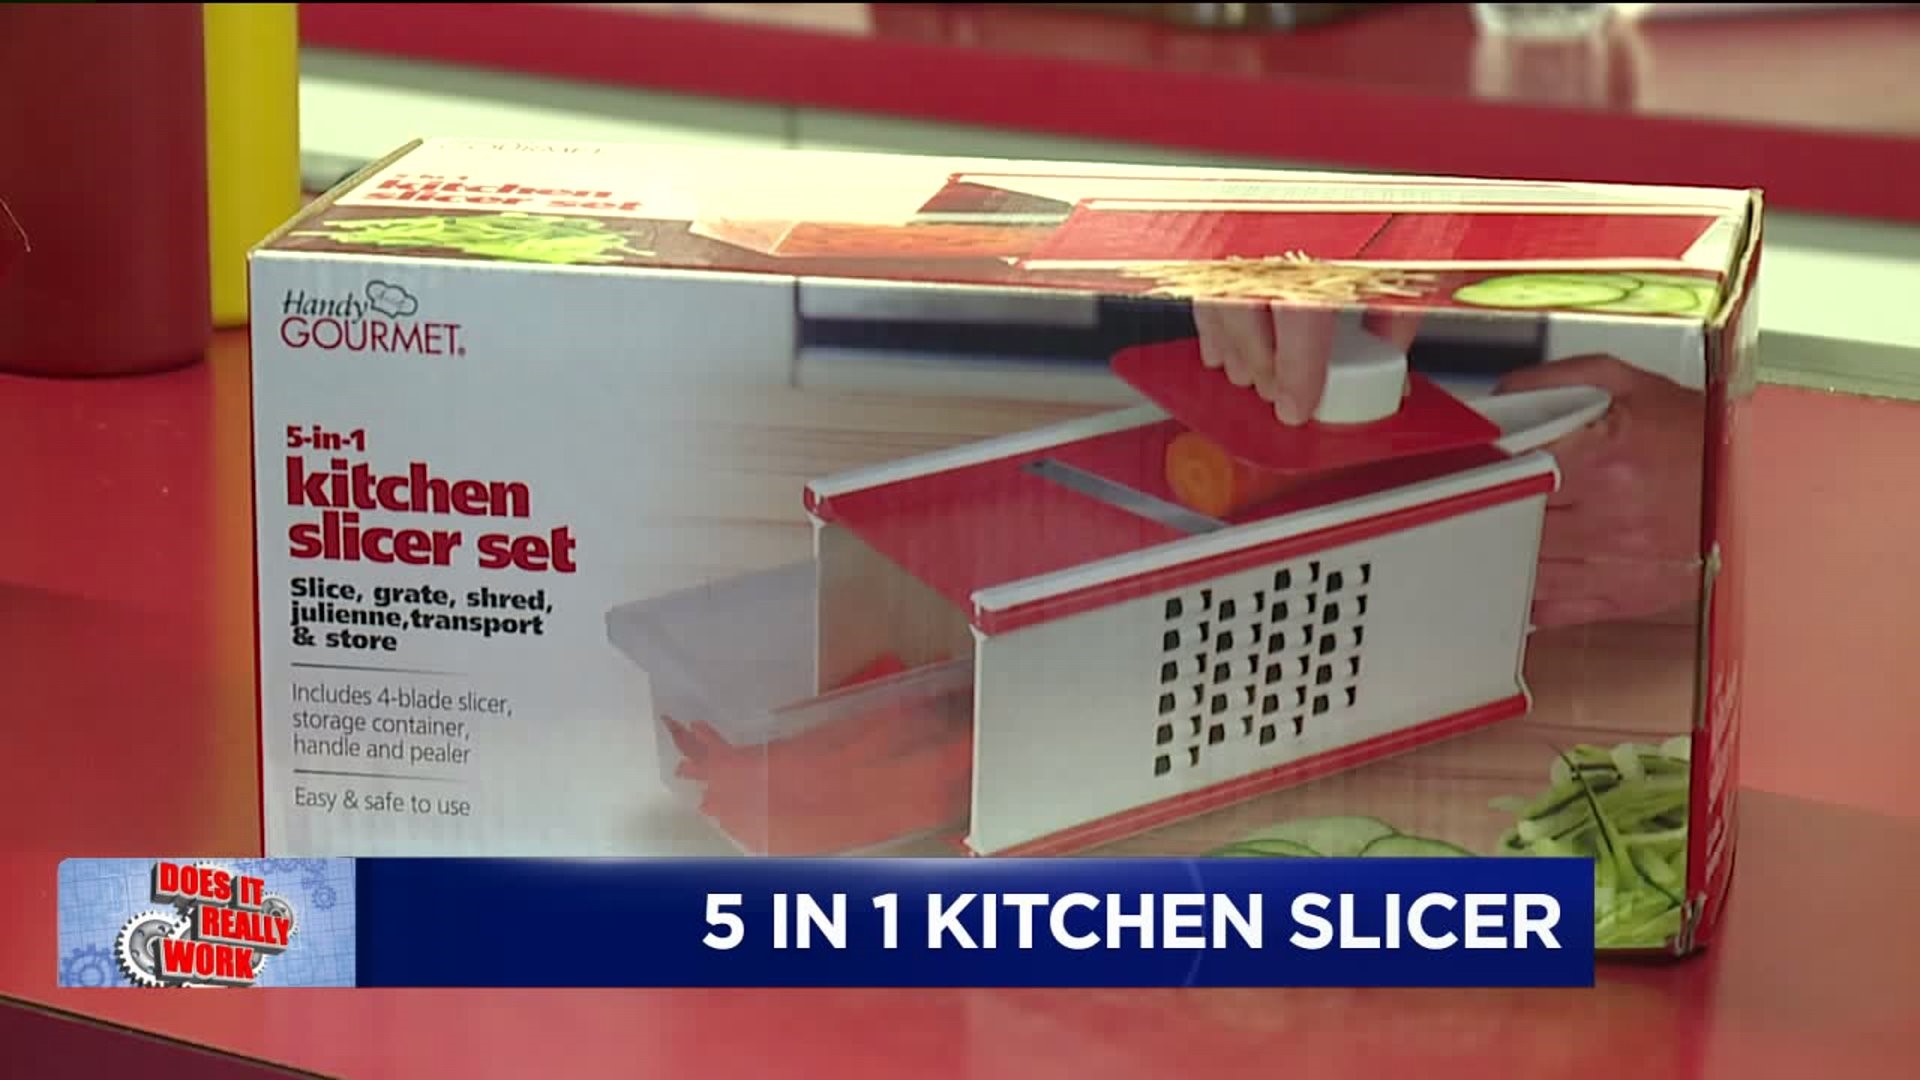 Does It Really Work: 5 in 1 Kitchen Slicer